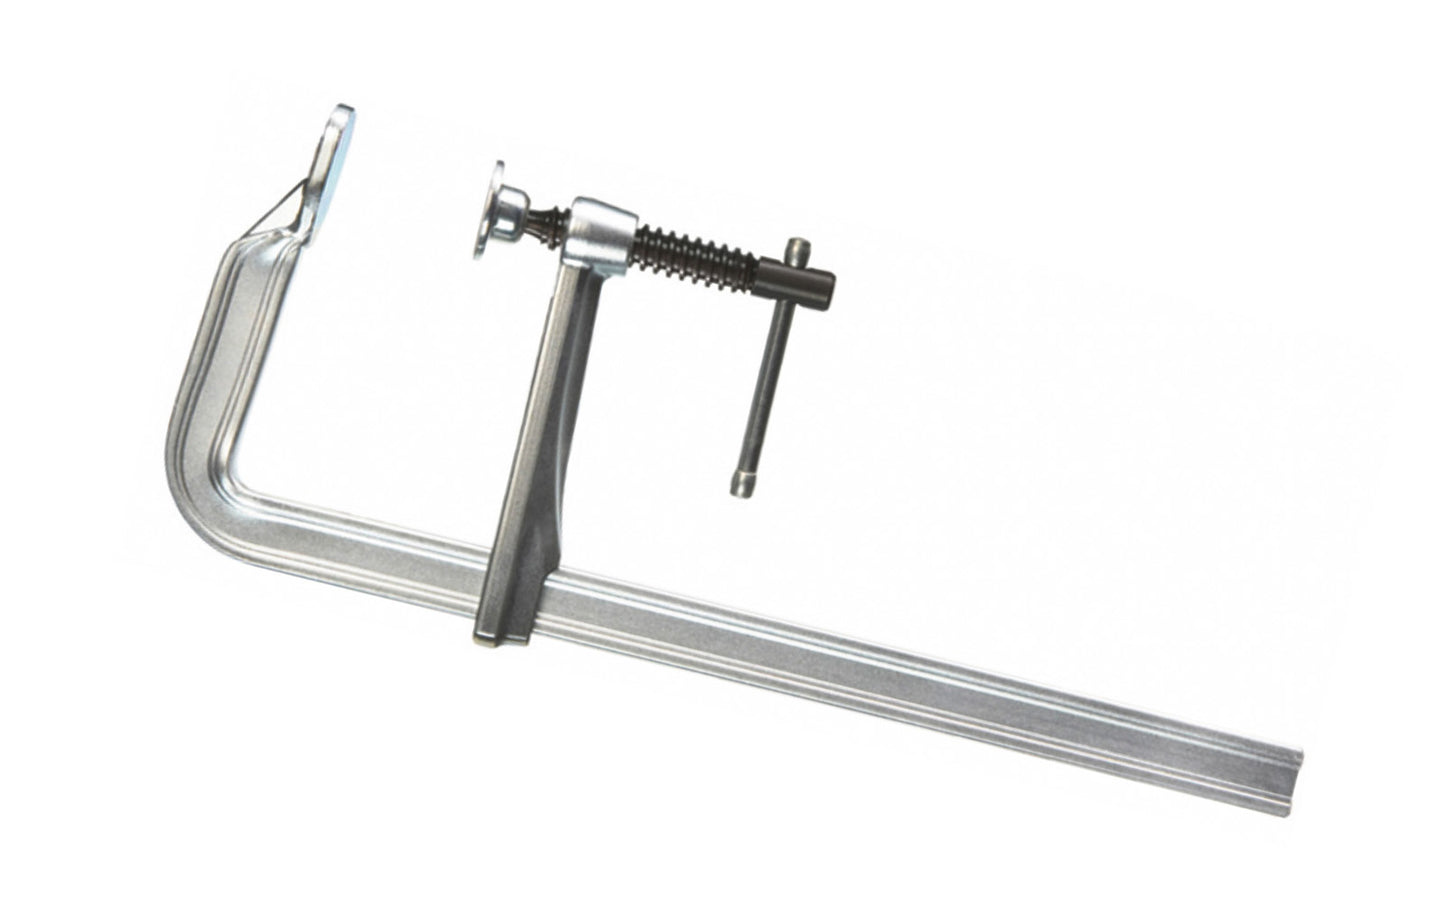 The 12" Bessey All-Steel "F-Style" Bar Clamp 1200-S12 has a patented rail profile that offers more clamp force with fewer spindle turns. U-shaped sliding arm offers straight line power for great stability. Heat treated, high carbon Acme threaded screw is tempered & quenched, which gives greater load capacity. 788502200158